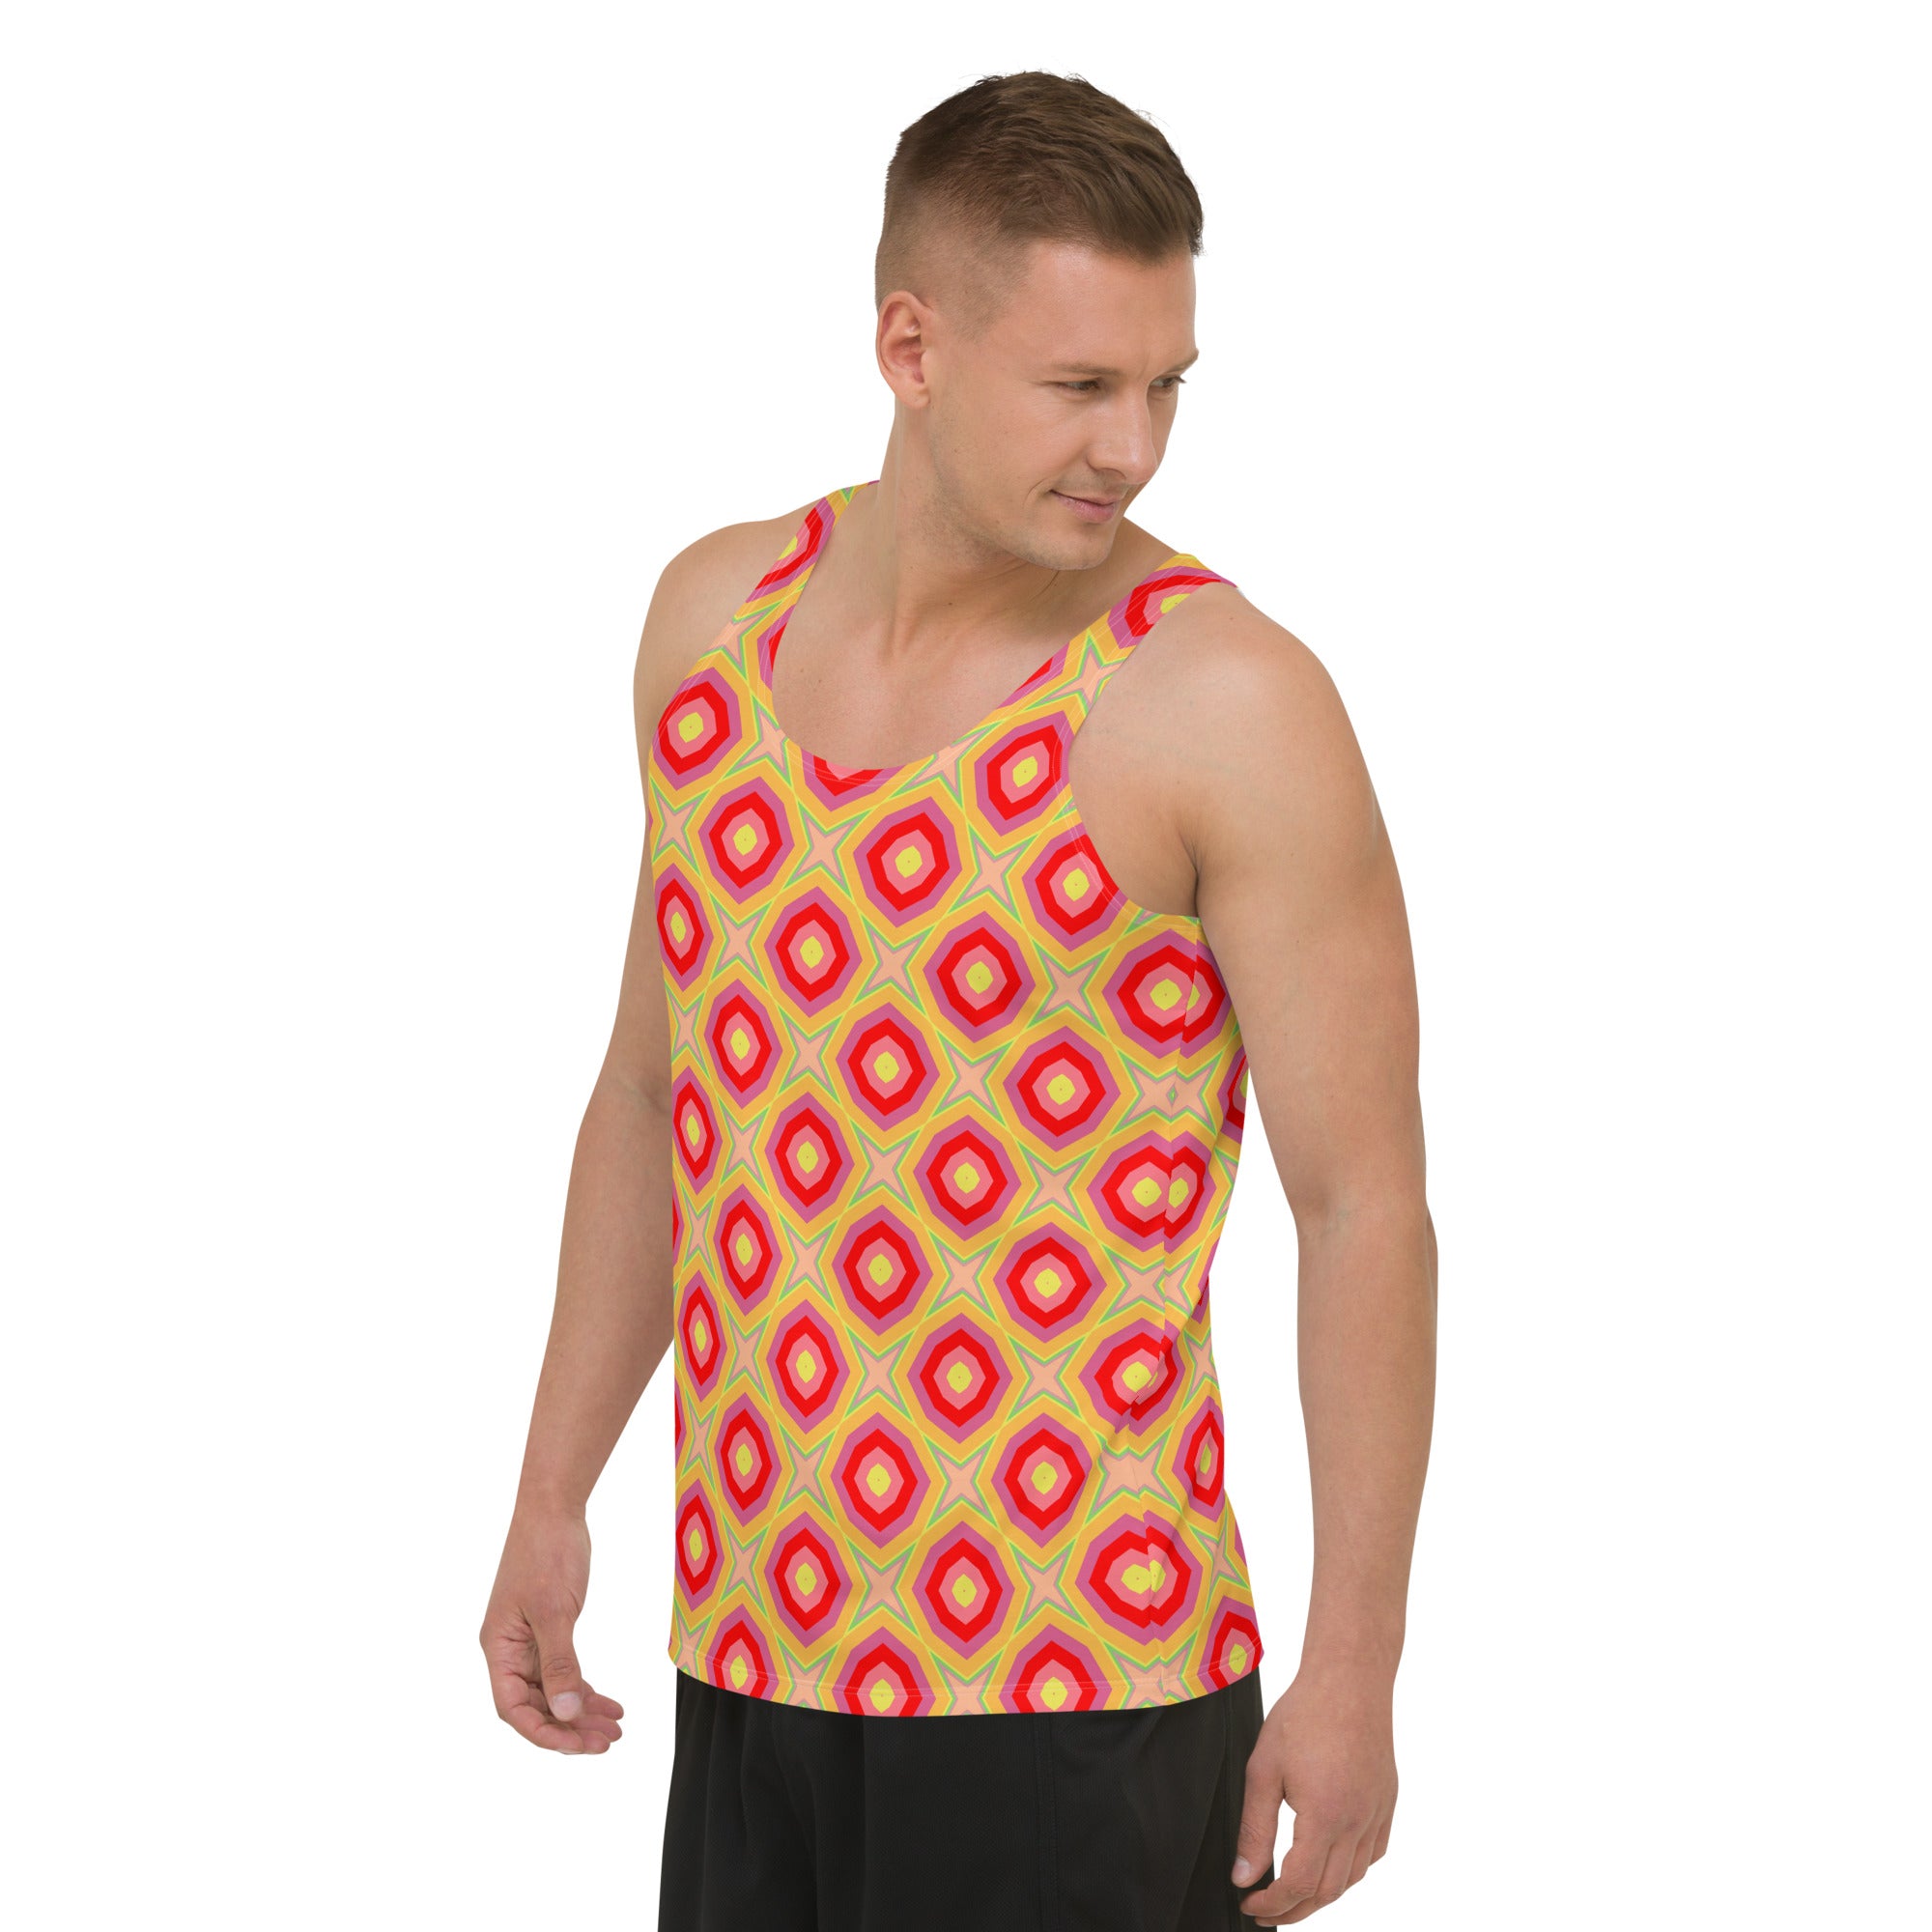 Stylish Men's Tank Top with Linear Pattern